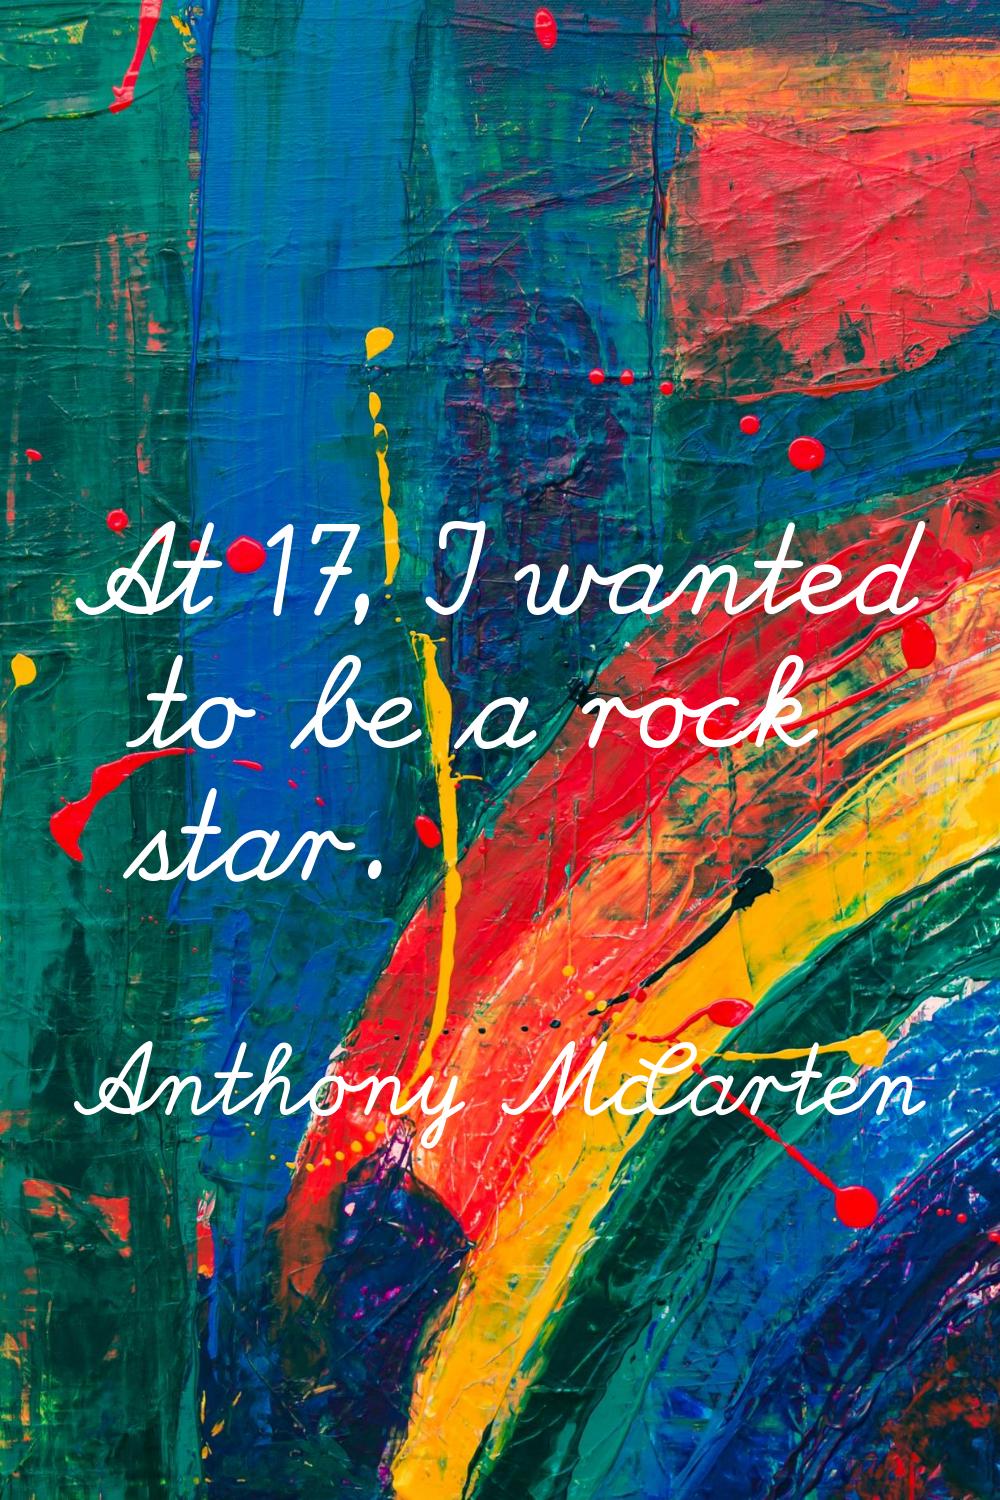 At 17, I wanted to be a rock star.